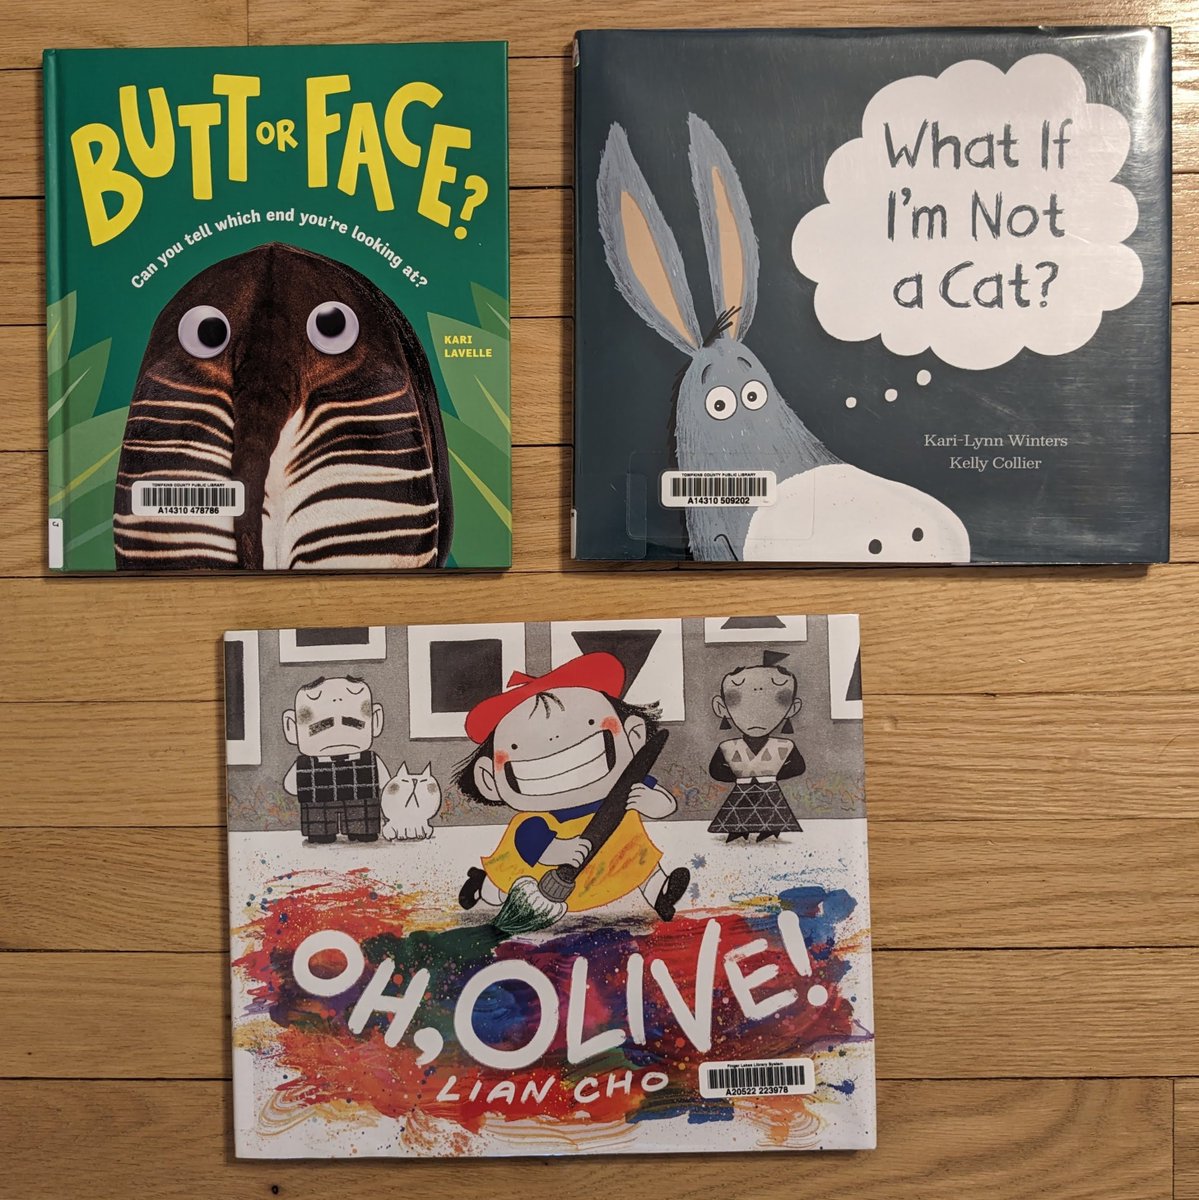 Getting back to #library haul #picturebooks #kidlit These were from Jan. Butt or Face? - @KariALavelle What If I'm Not a Cat - @KariLynnWinters & @collierK_ Oh, Olive! - @liantomato